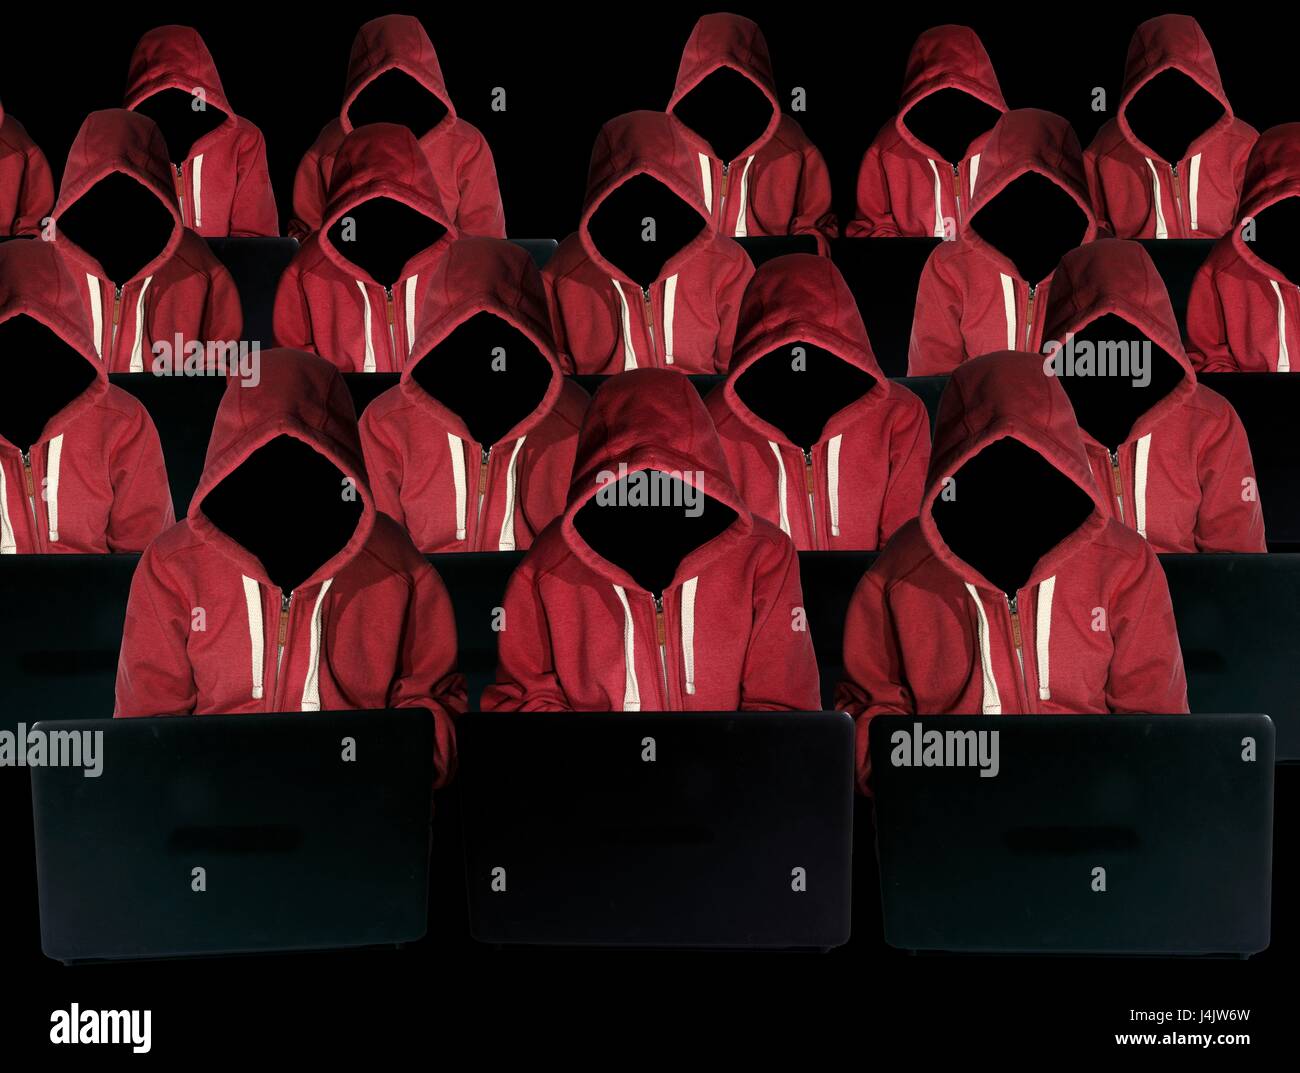 Hooded figures hacking laptop computers, illustration. Stock Photo